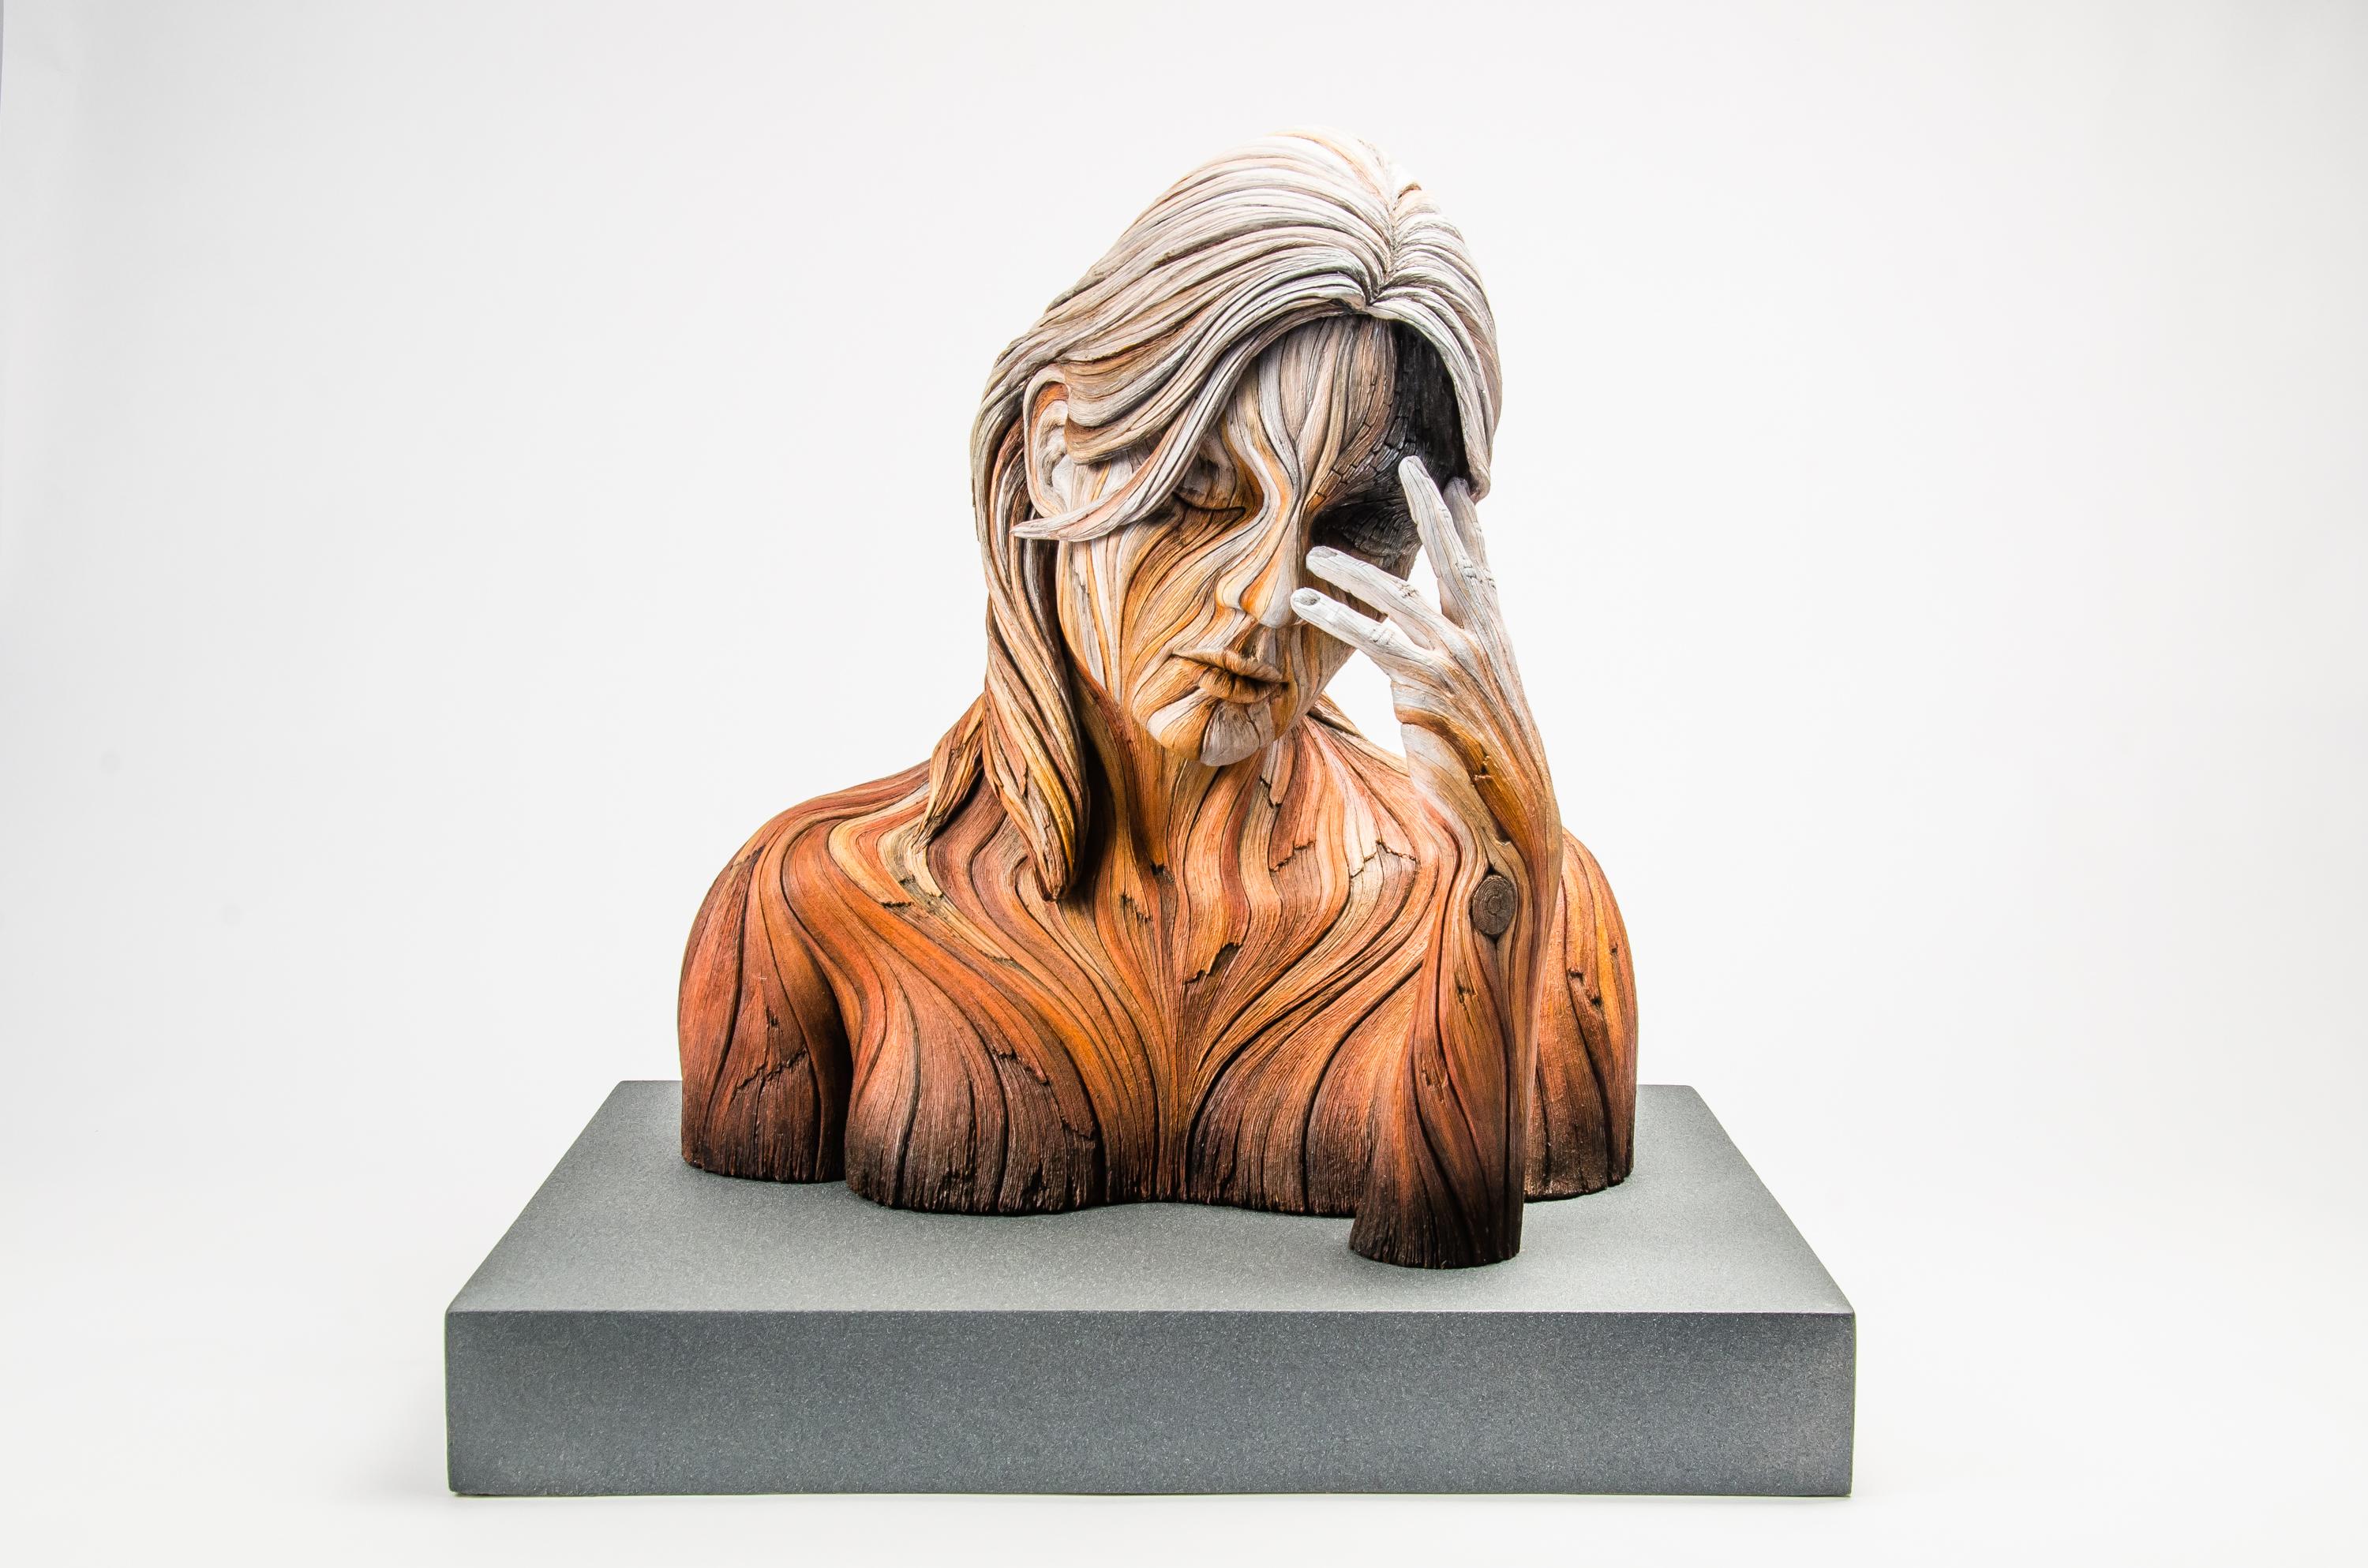 Christopher David White Figurative Sculpture - My Grain, Contemporary Ceramic Sculpture with Acrylic Paint, Mixed Media